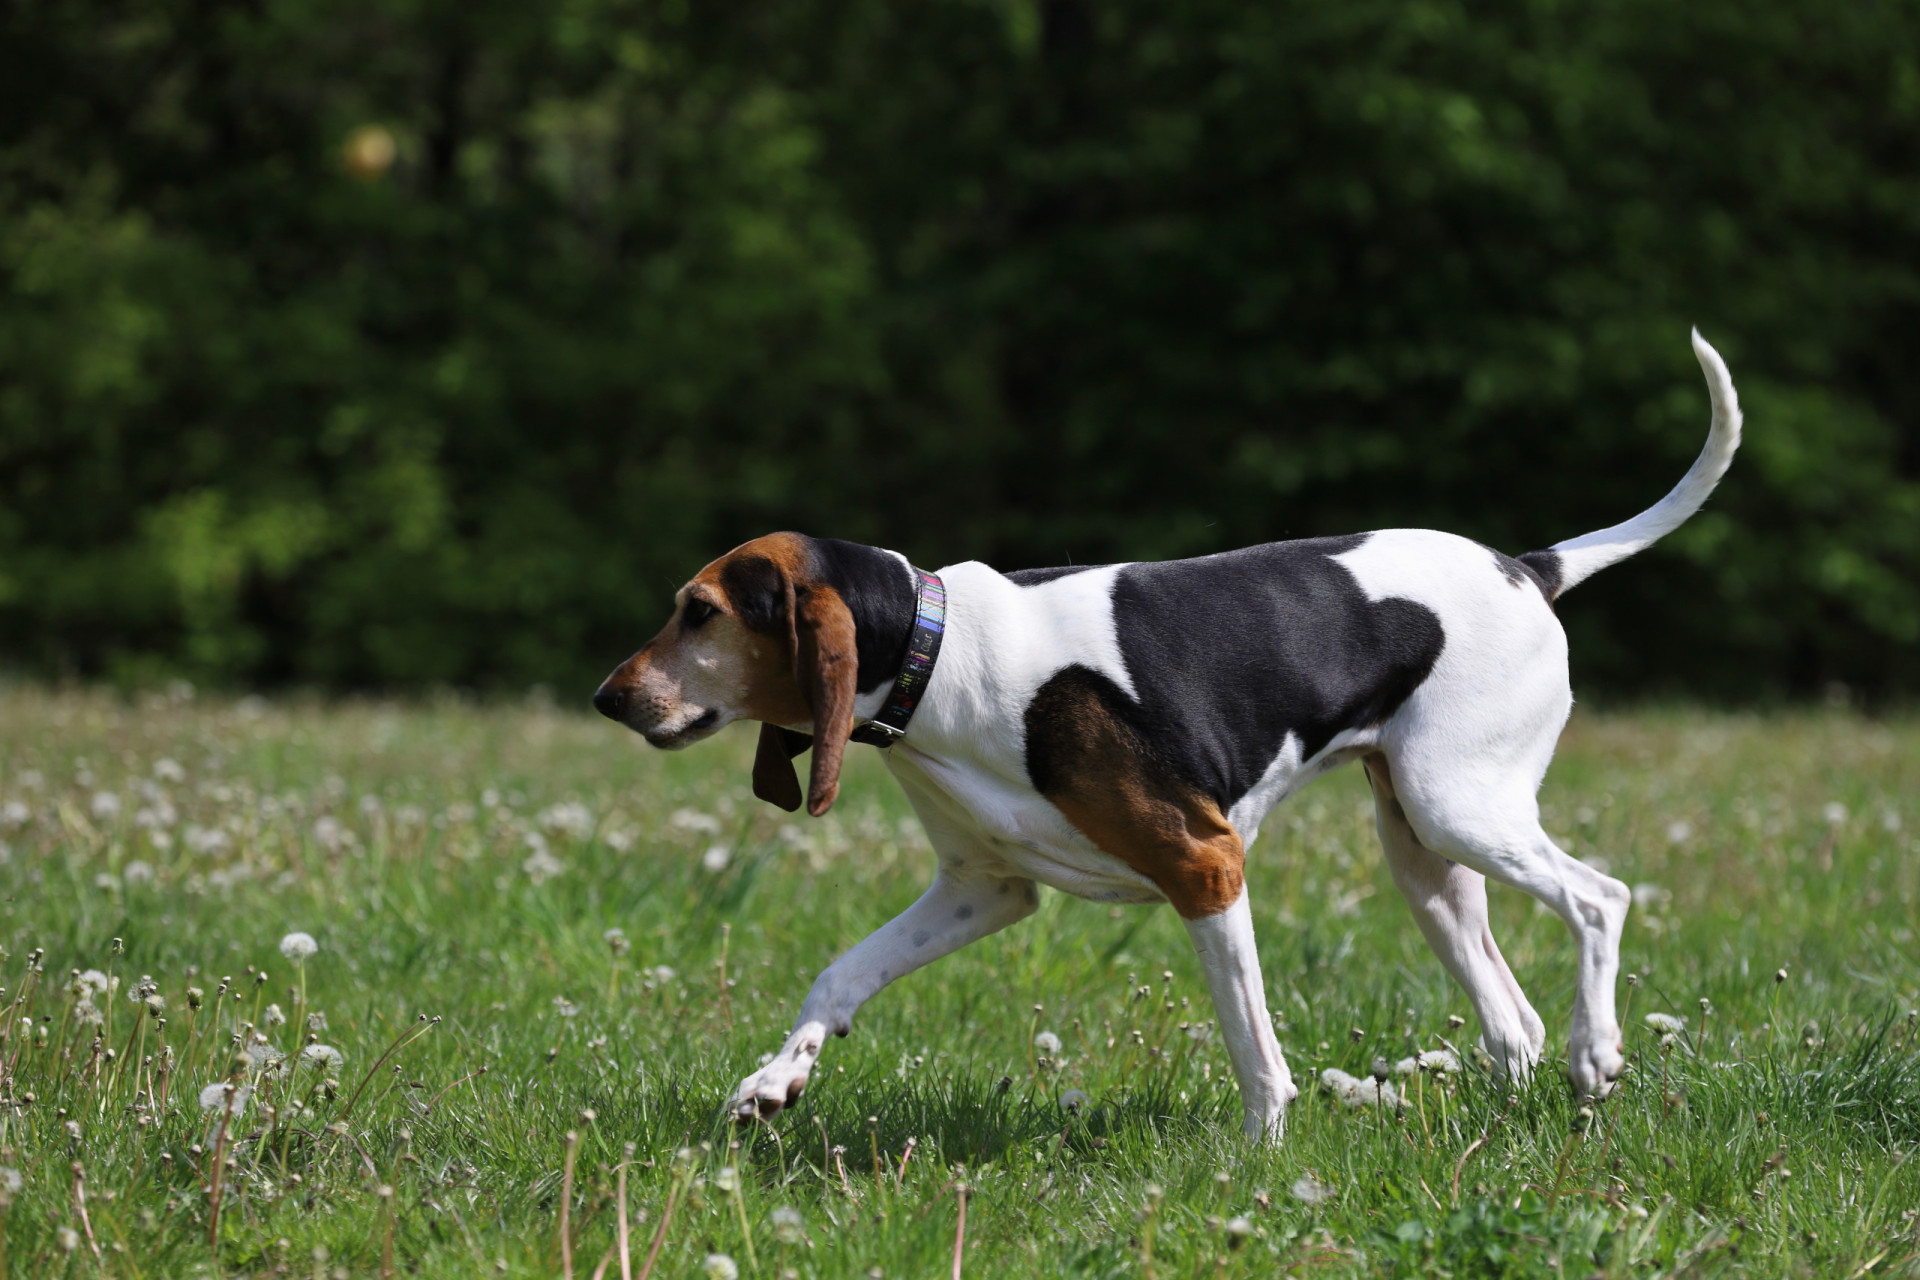 <p>This playful dog loves to wander and run around. Similar in appearance to beagles, they live to be around 13 years old.</p><p>You may also like:<a href="https://www.starsinsider.com/n/398126?utm_source=msn.com&utm_medium=display&utm_campaign=referral_description&utm_content=605595en-us"> Terrifying urban legends that are actually true</a></p>